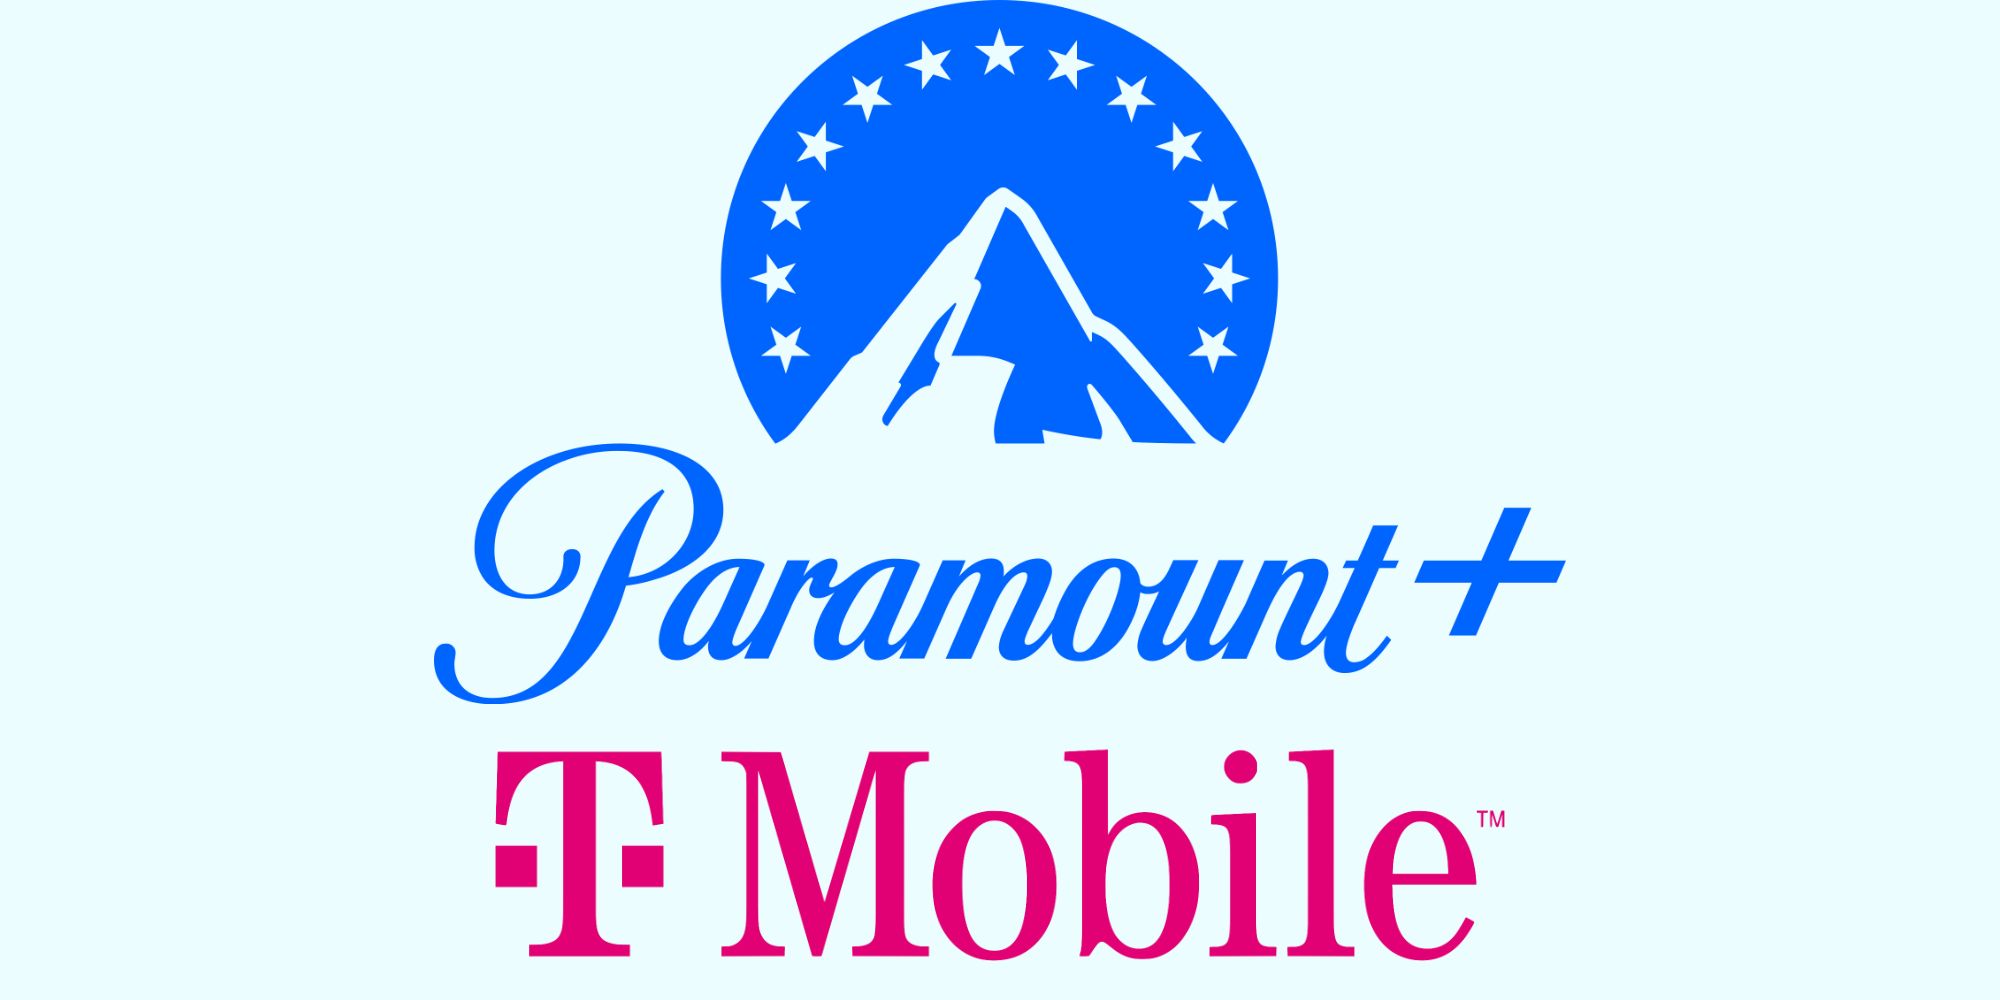 TMobiles Giving Away Free Paramount Subscriptions — How You Can Get One